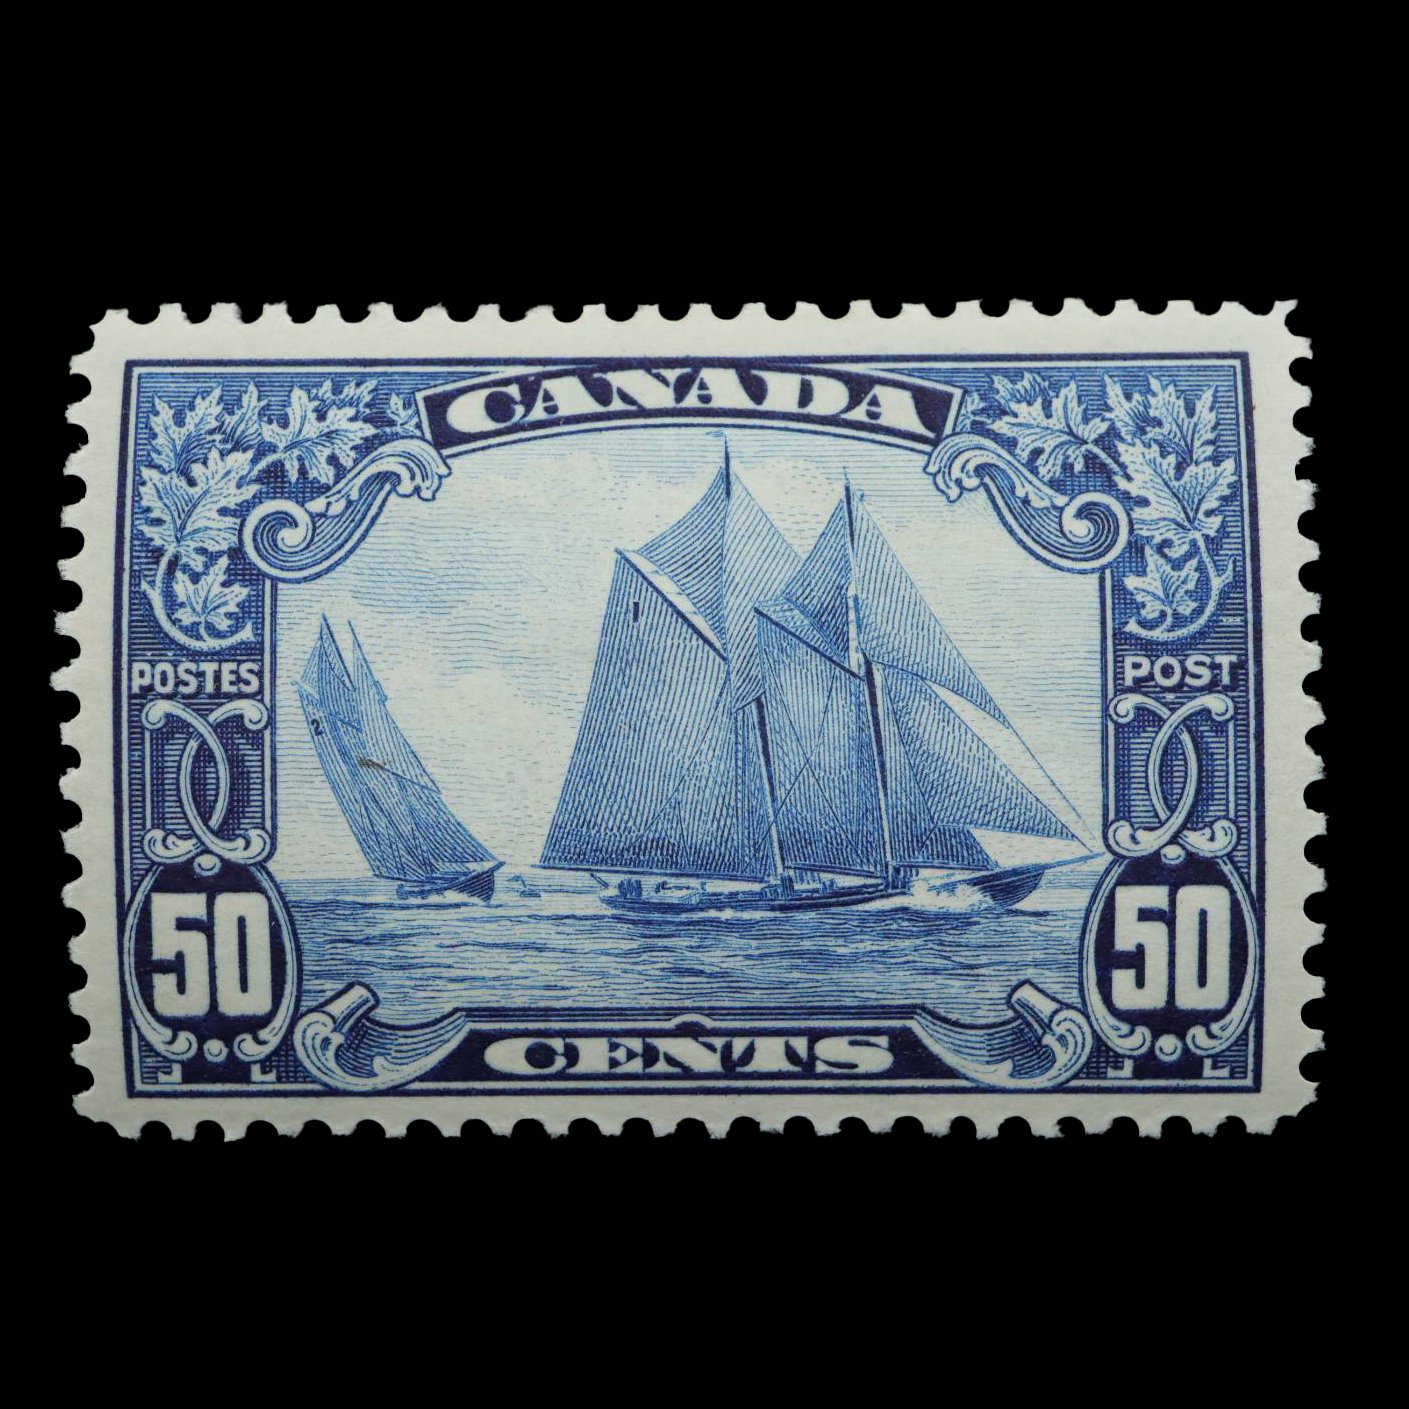 Canada #158iii 50c Bluenose &quot;Man on the Mast&quot; MLH =C$3000

Auction ends: TODAY, Thursday May 9th, at 6:47pm EST

View the auction and bid: https://www.ebay.com/itm/296399419064